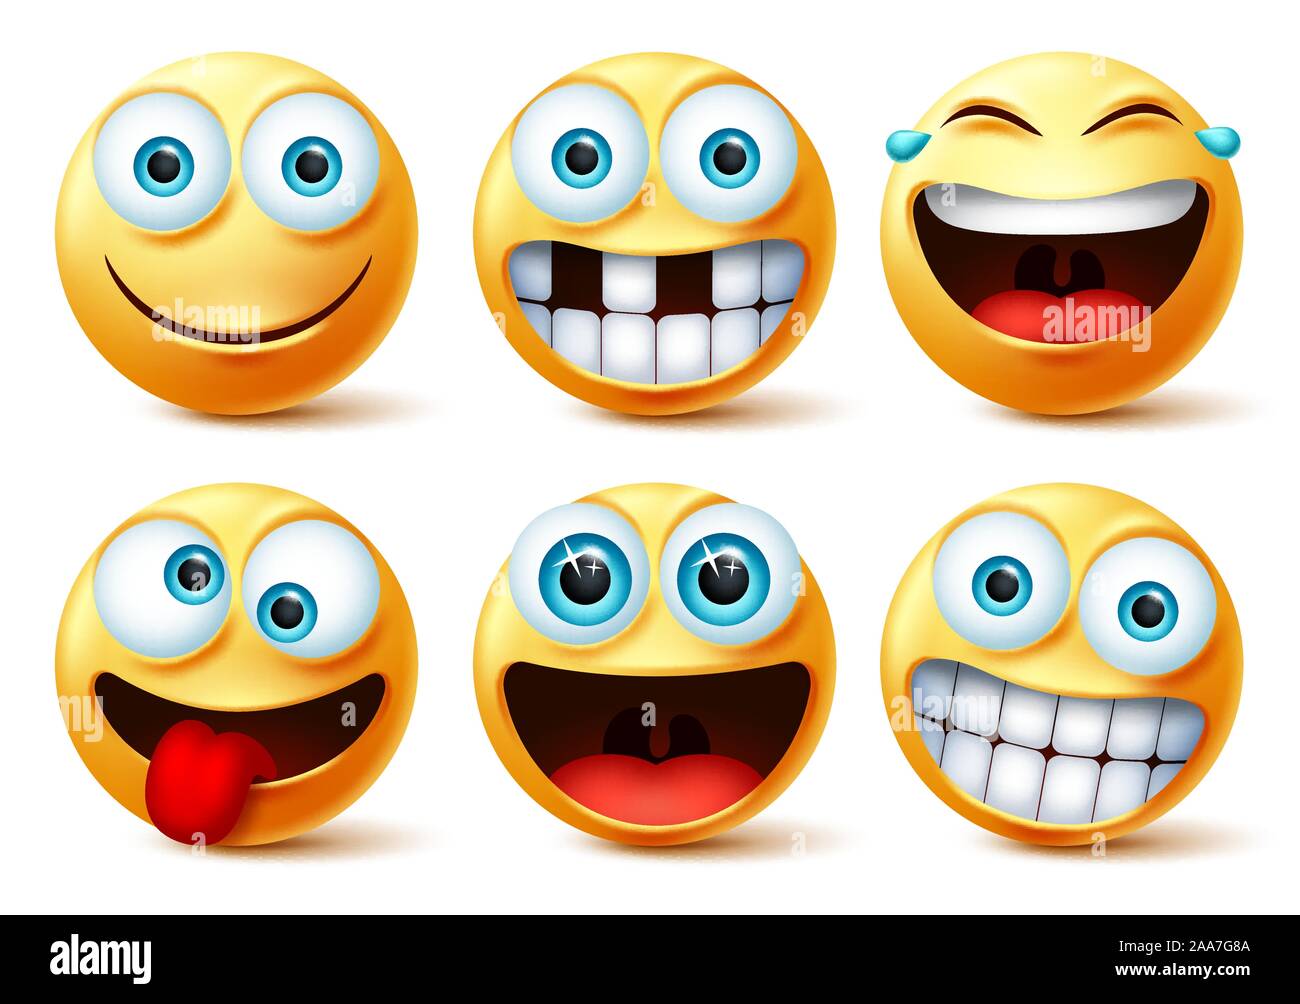 Smiley emojis vector face set. Smileys emoticons and emoji cute faces in crazy, funny, excited, laughing, and toothless facial expressions isolated. Stock Vector